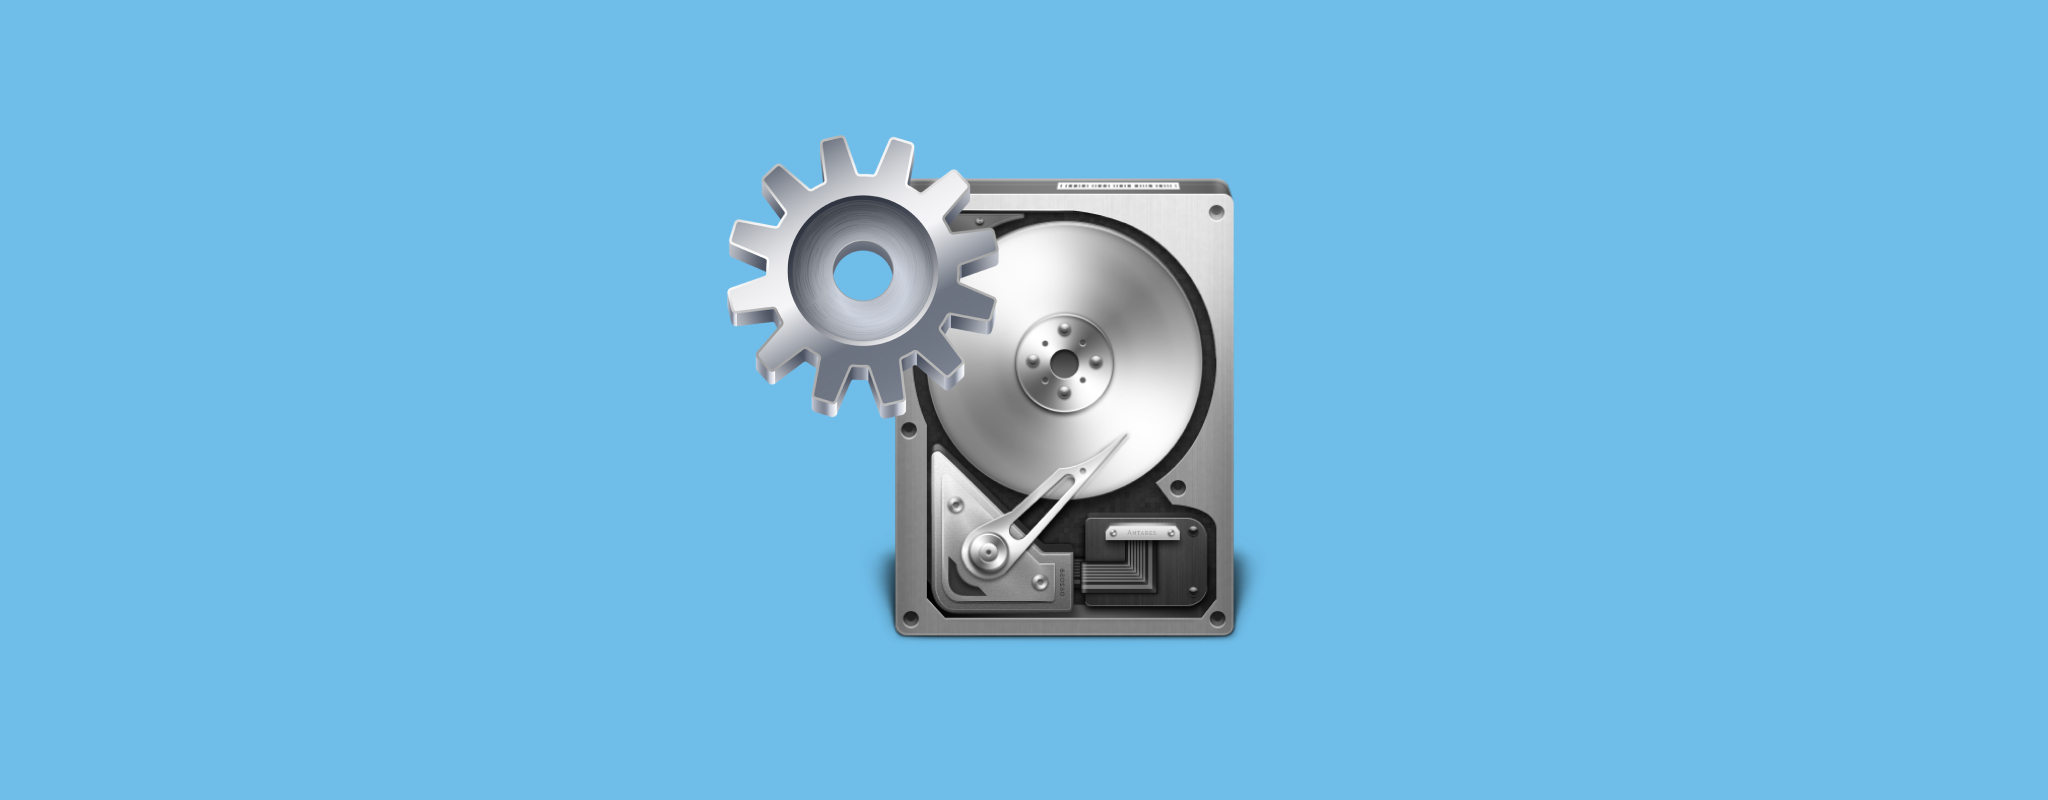 How does data recovery work